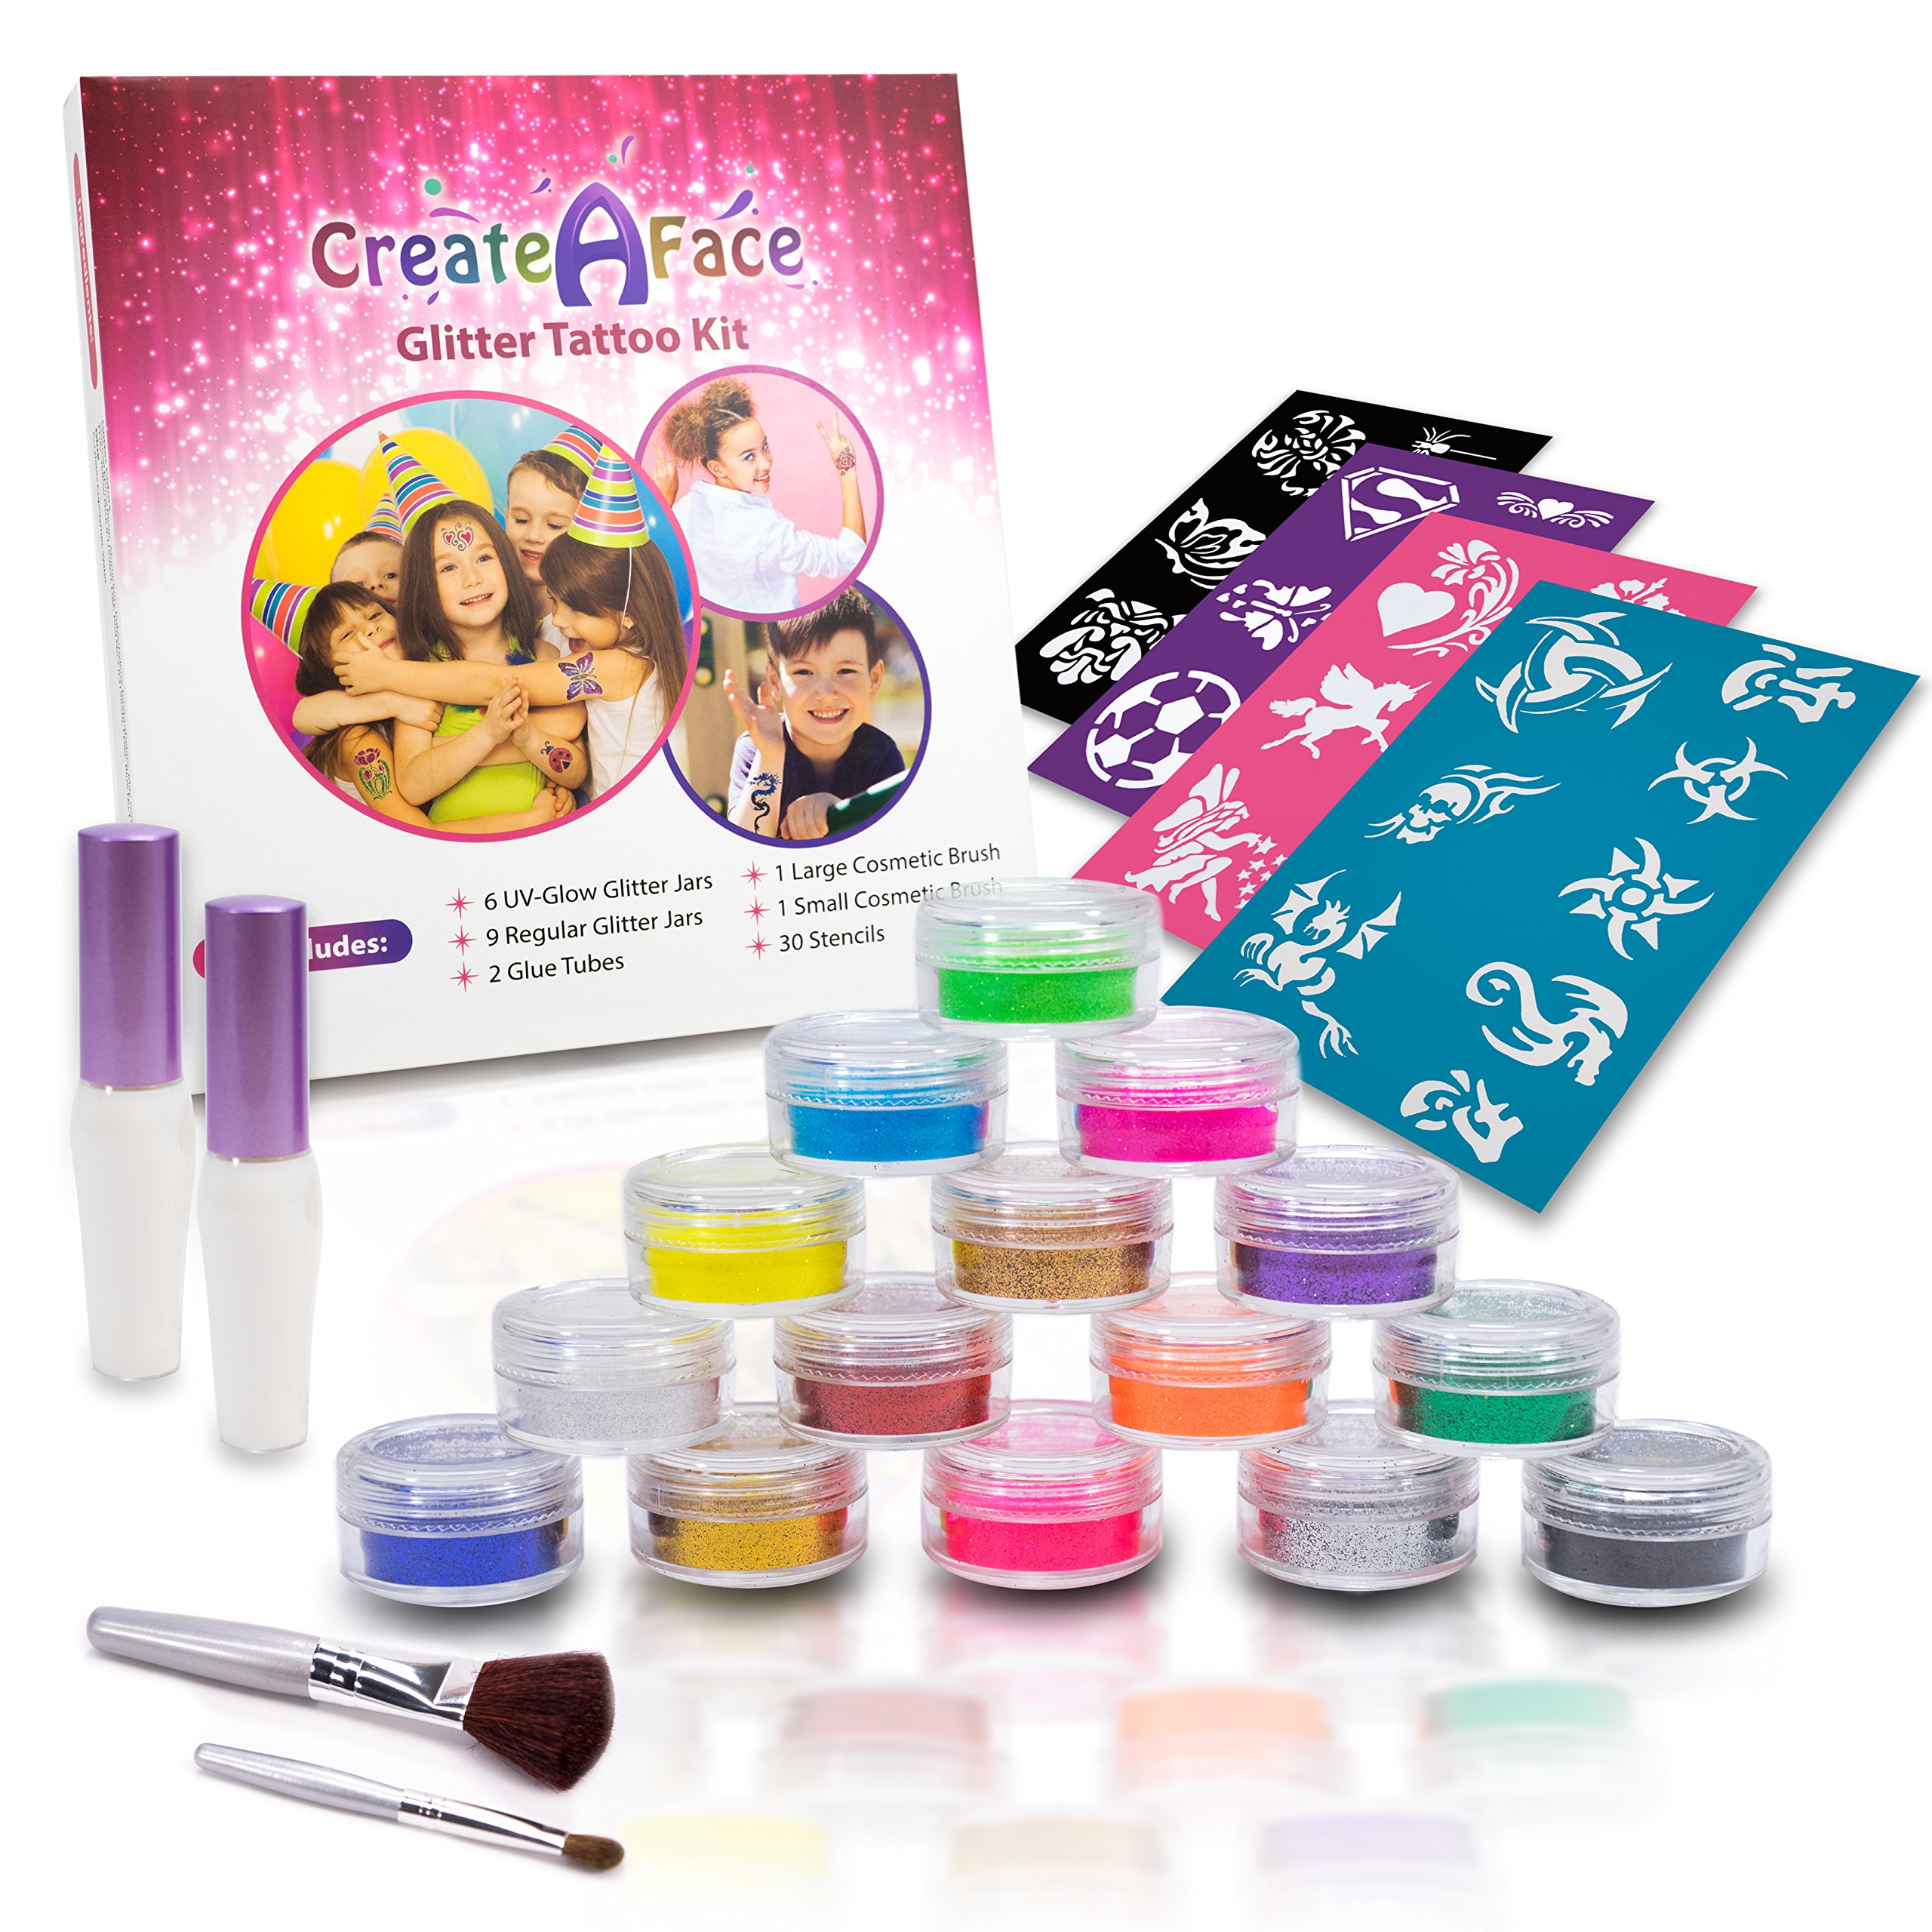 Glitter Tattoo Kit - Amazing Gift Idea for Girls (15 X-Large Color Jars, 32 Temporary Tattoos Stencils, 2 Glue Applicator & 2 Cosmetic Brushes) Hypoallergenic, Waterproof and Easy to Apply